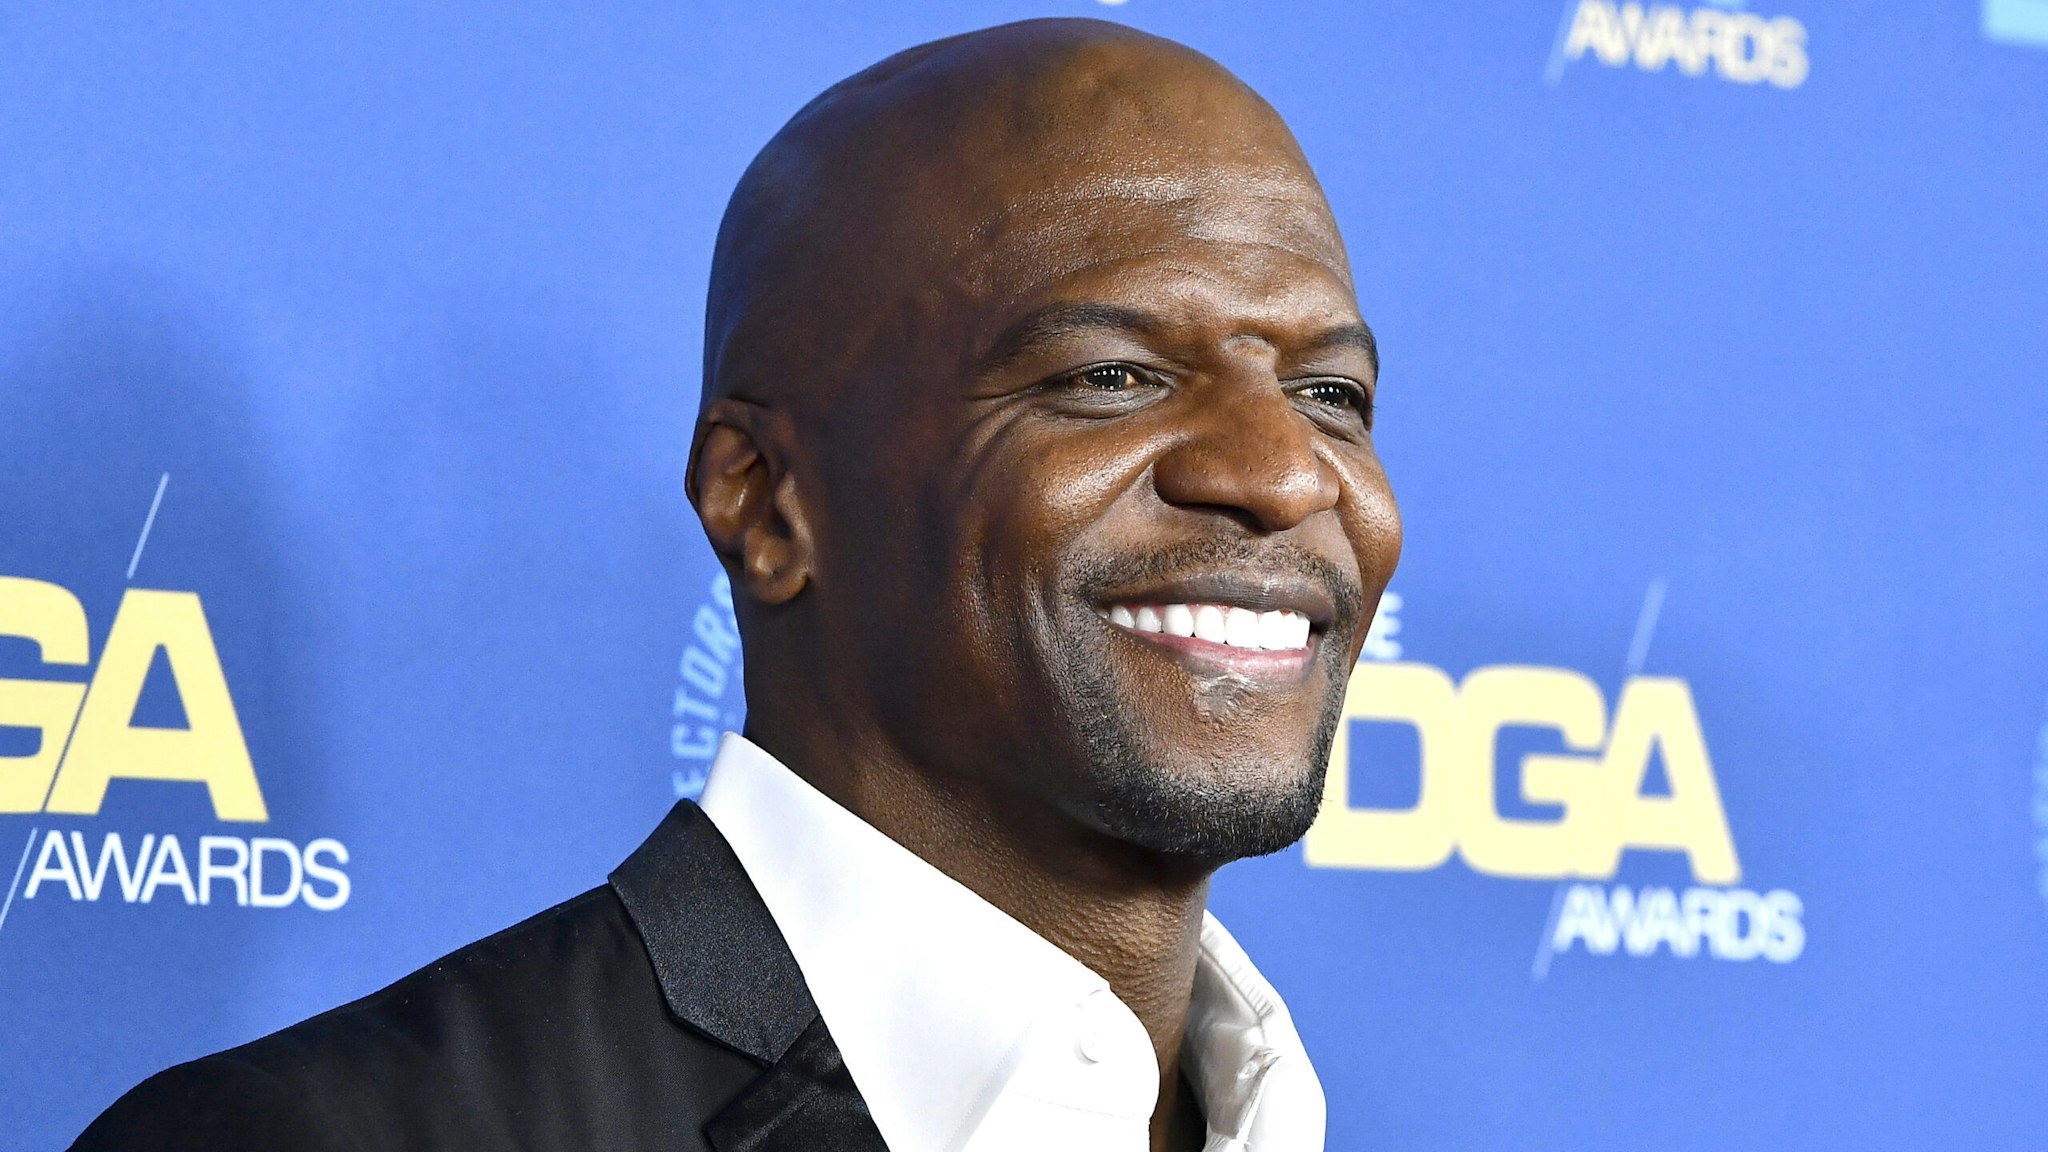 Terry Crews arrives for the 72nd Annual Directors Guild Of America Awards at The Ritz Carlton on January 25, 2020 in Los Angeles, California.